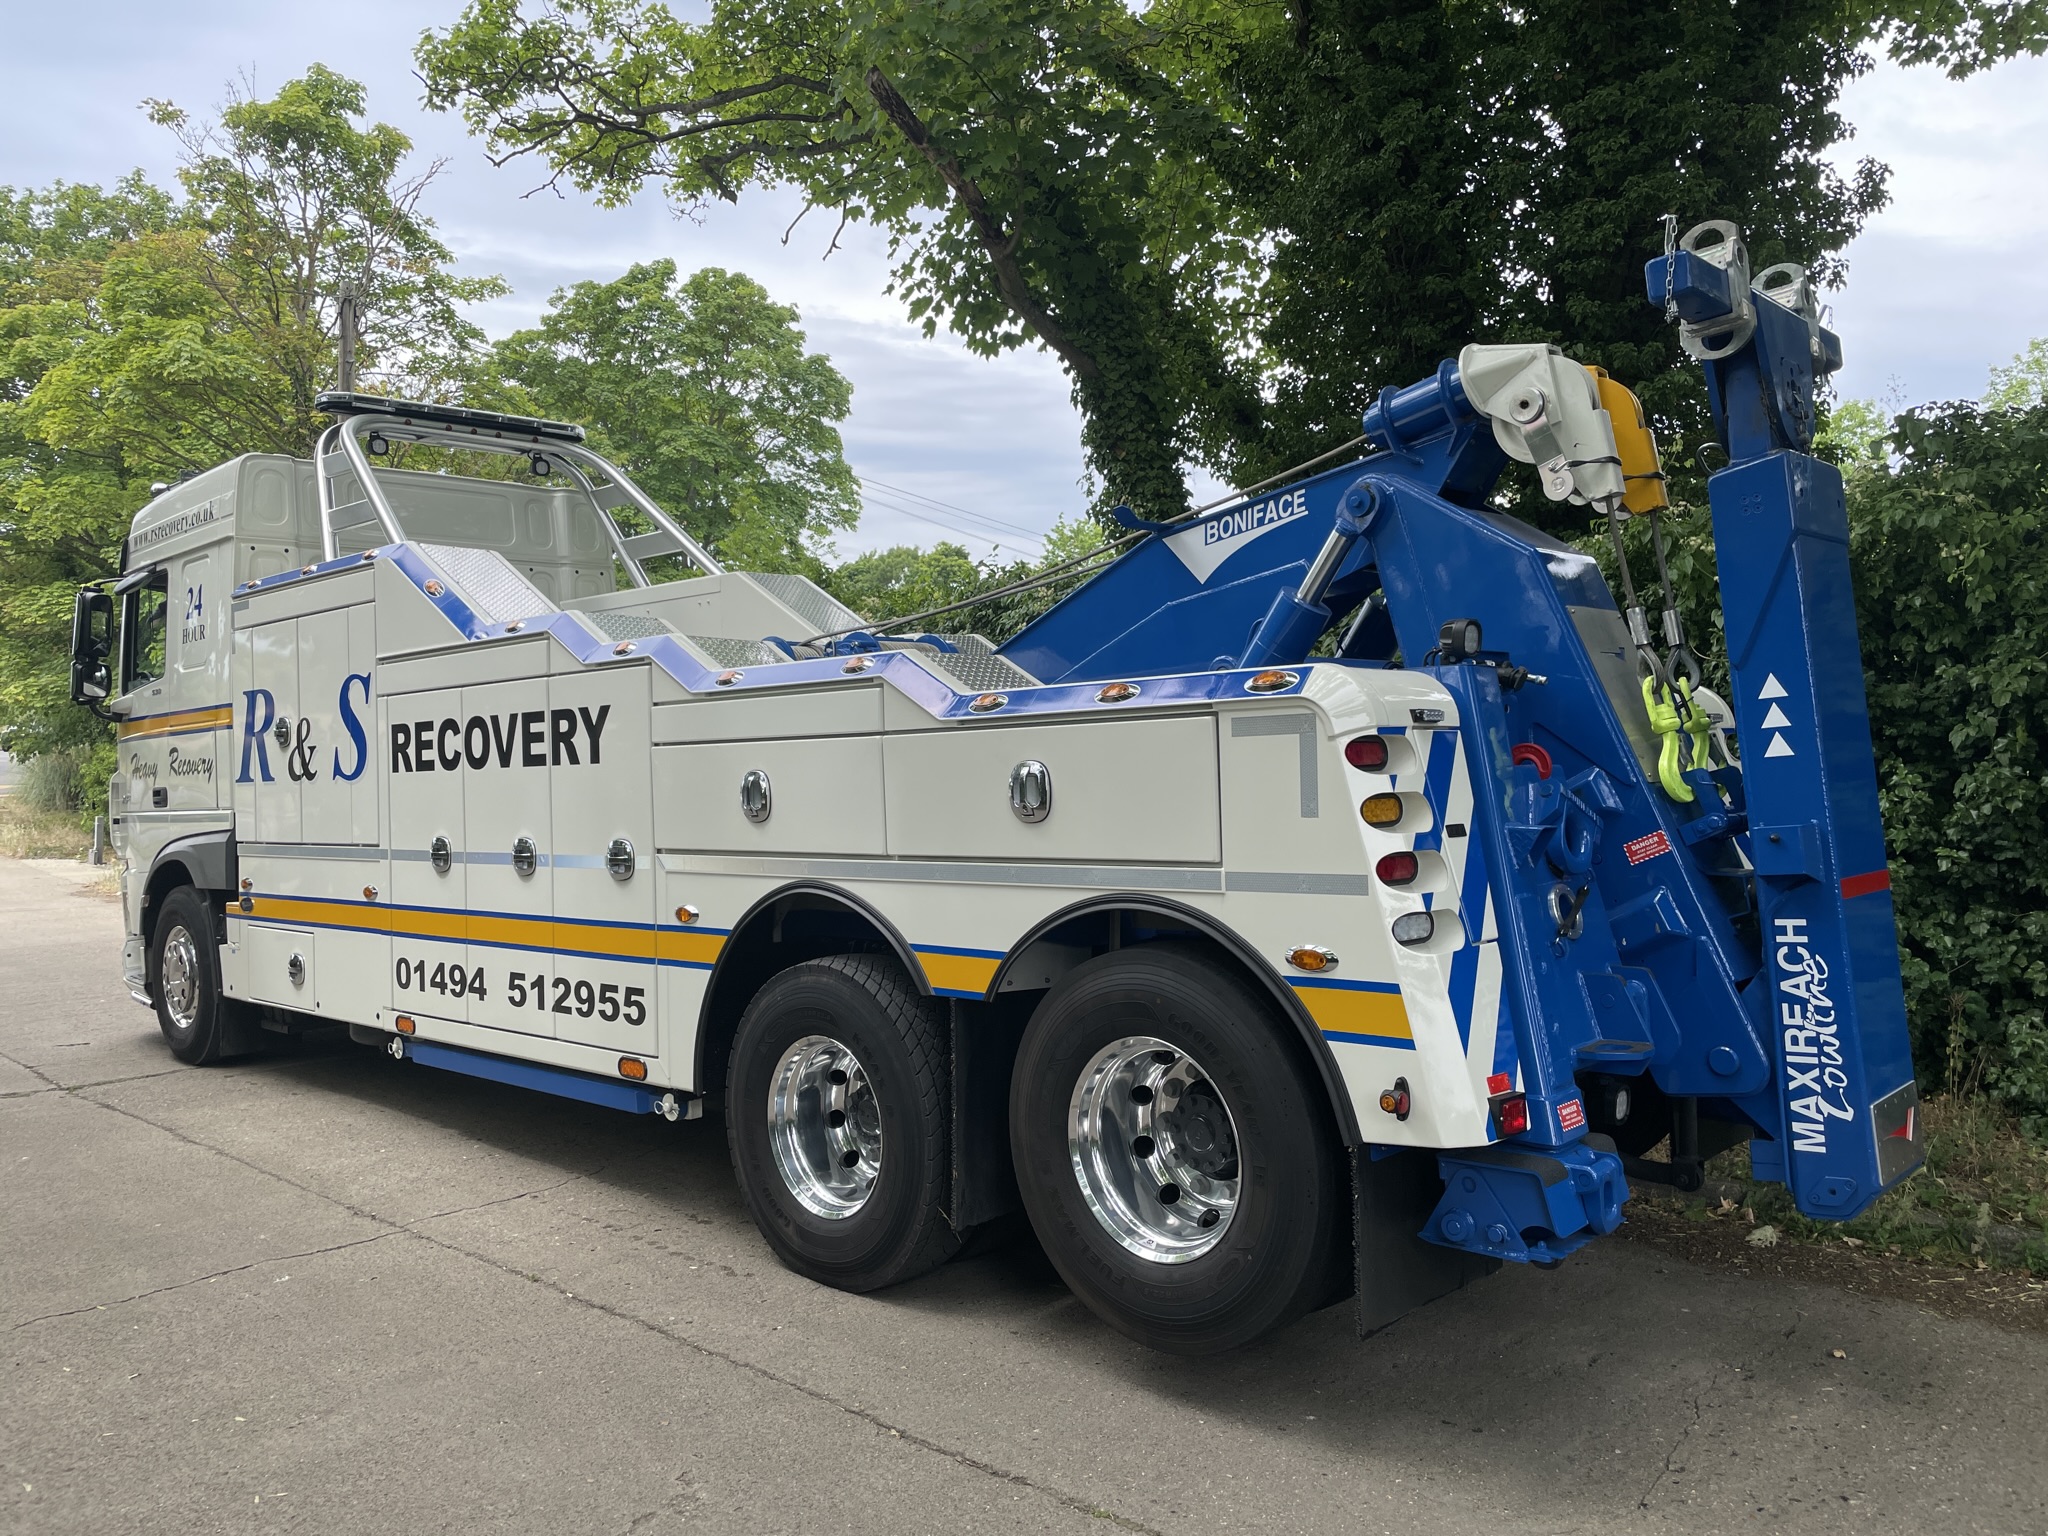 A New Interstater for R&S Recovery Services